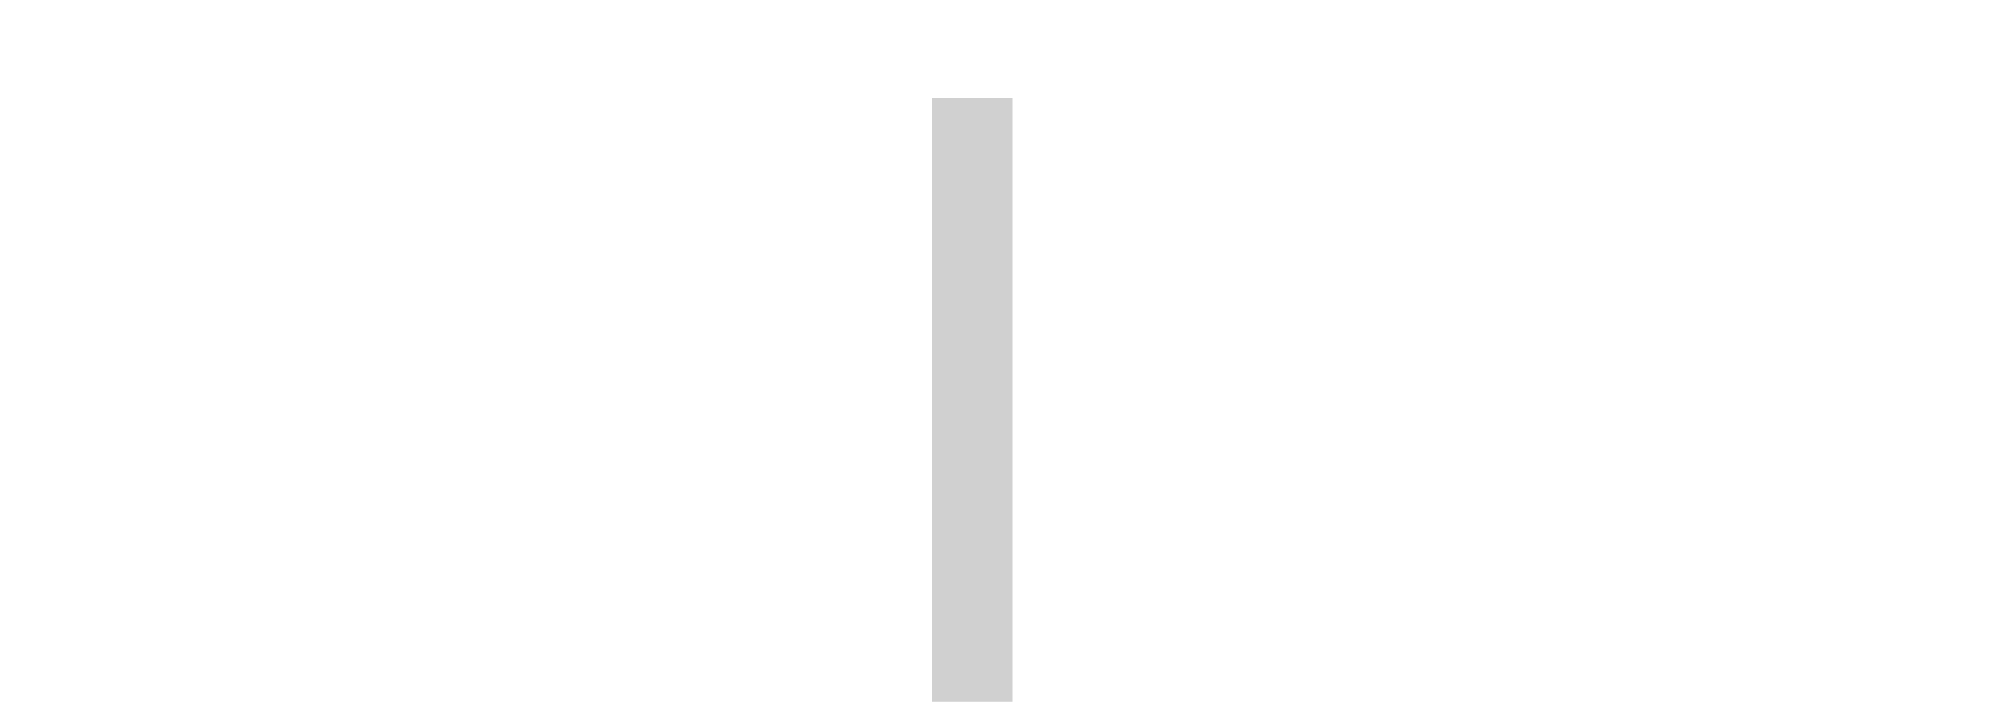 Vertical grey bar that is part of the bar graph